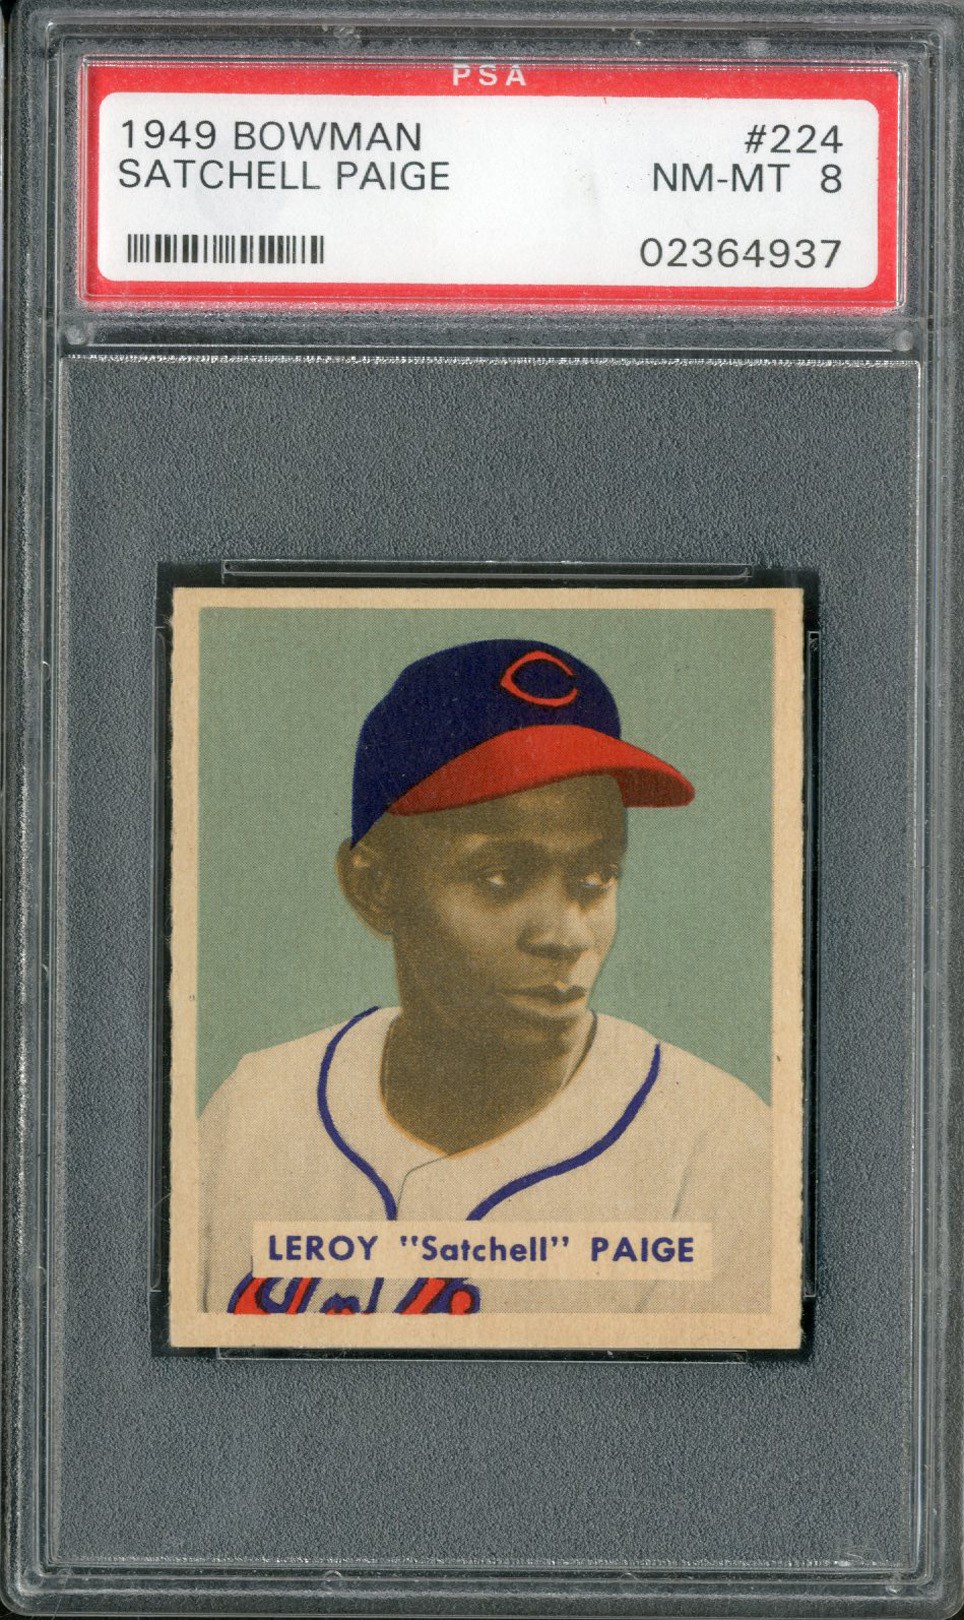 Baseball and Trading Cards - 1949 Bowman Satchel Paige #224 PSA NM-MT 8